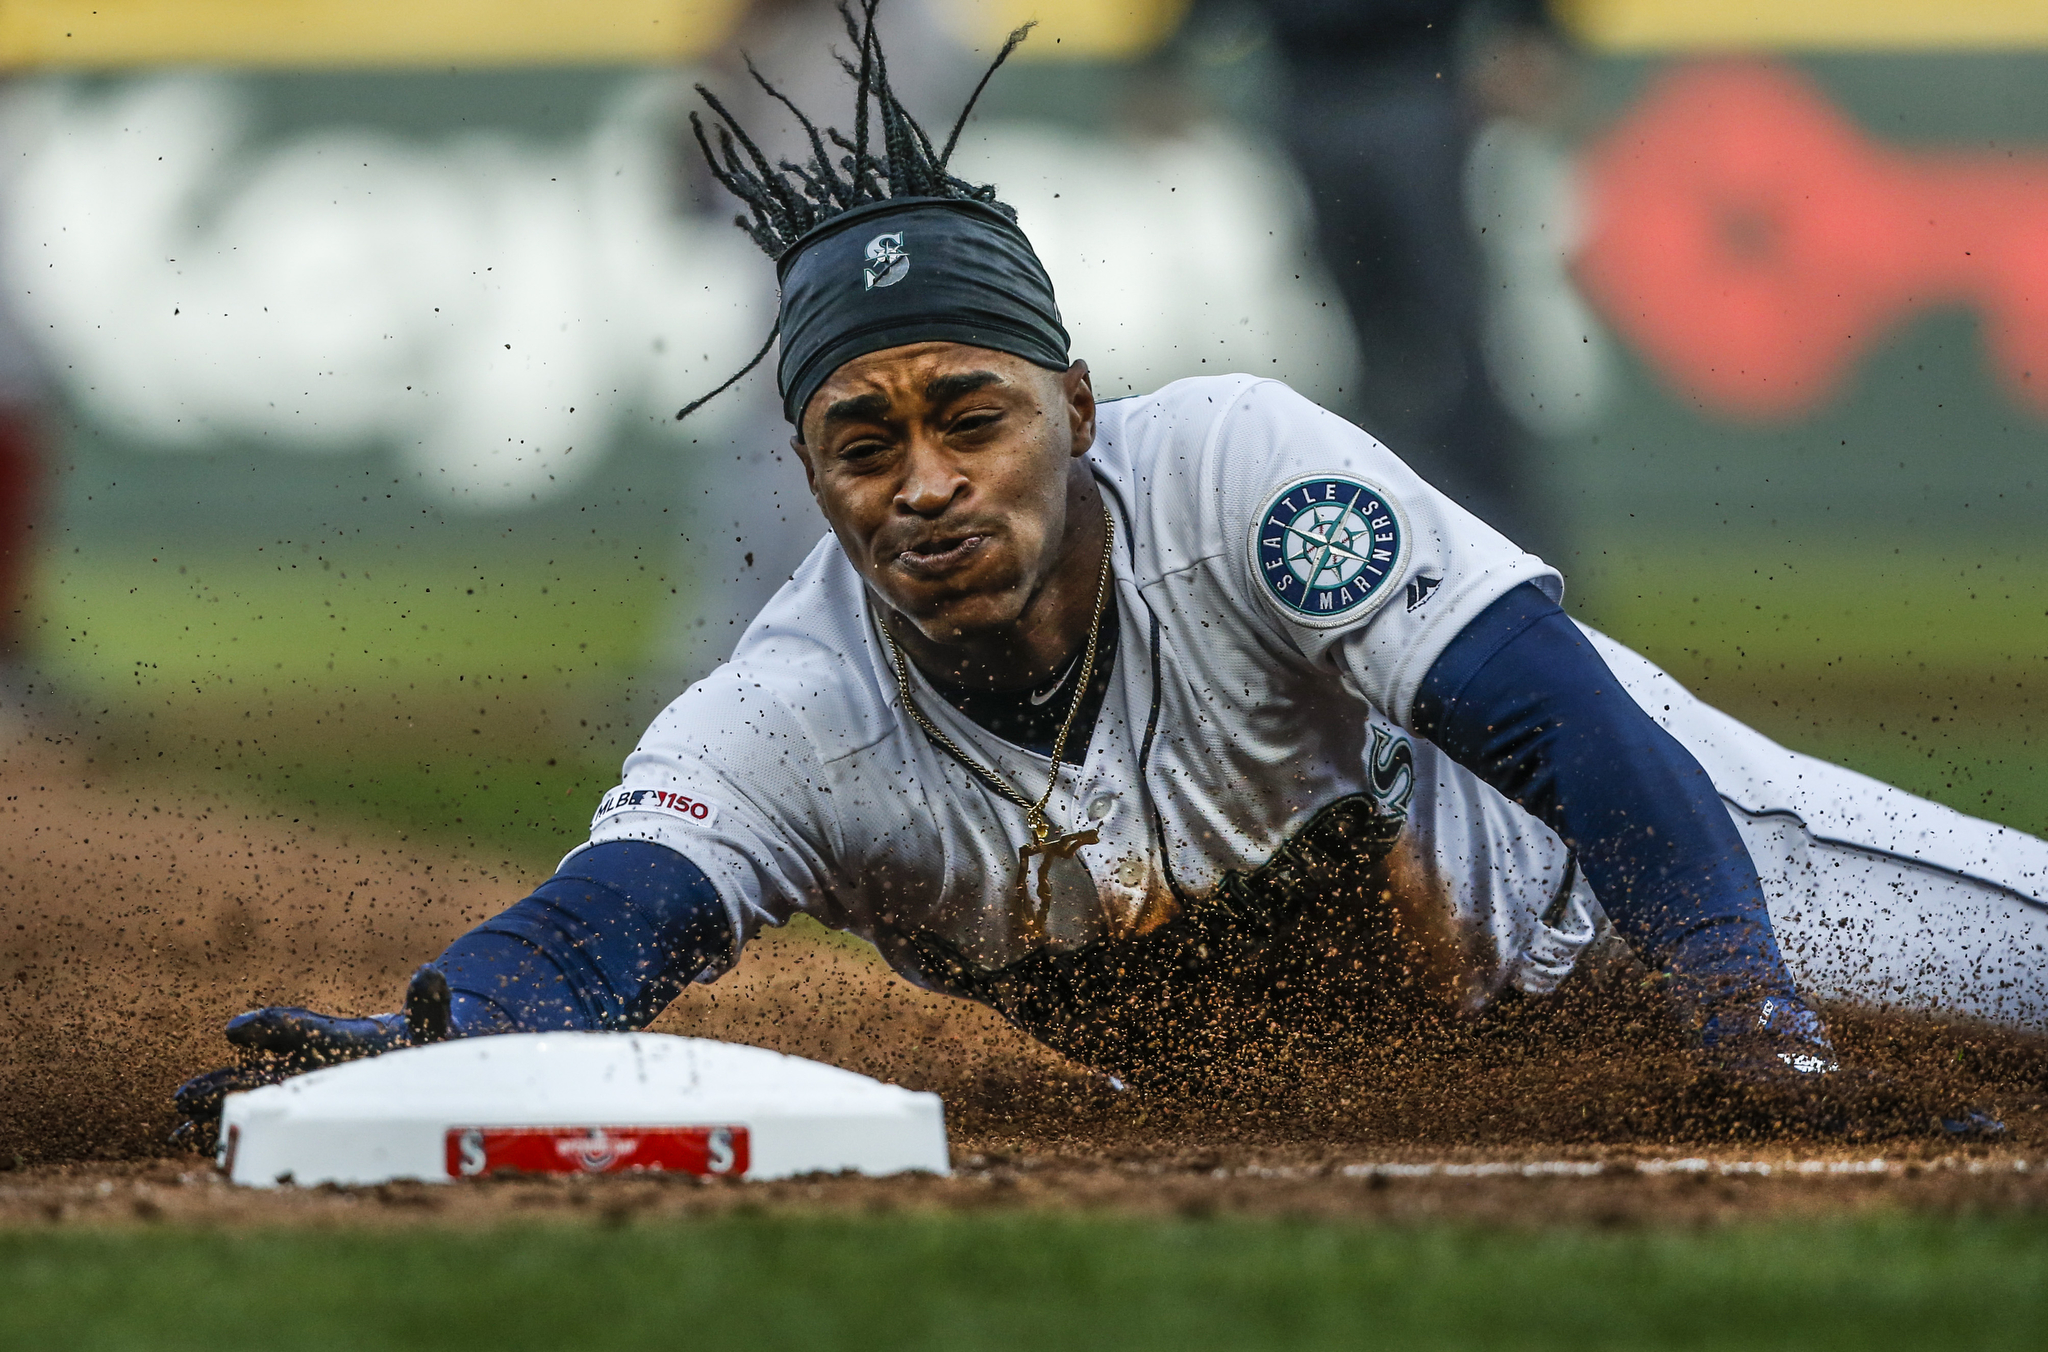  Mariners’ Mallex Smith slides into third base during the Opening Day game against the Boston Red Sox at T-Mobile Park on Thursday, March 28, 2019 in Seattle, Washington. 